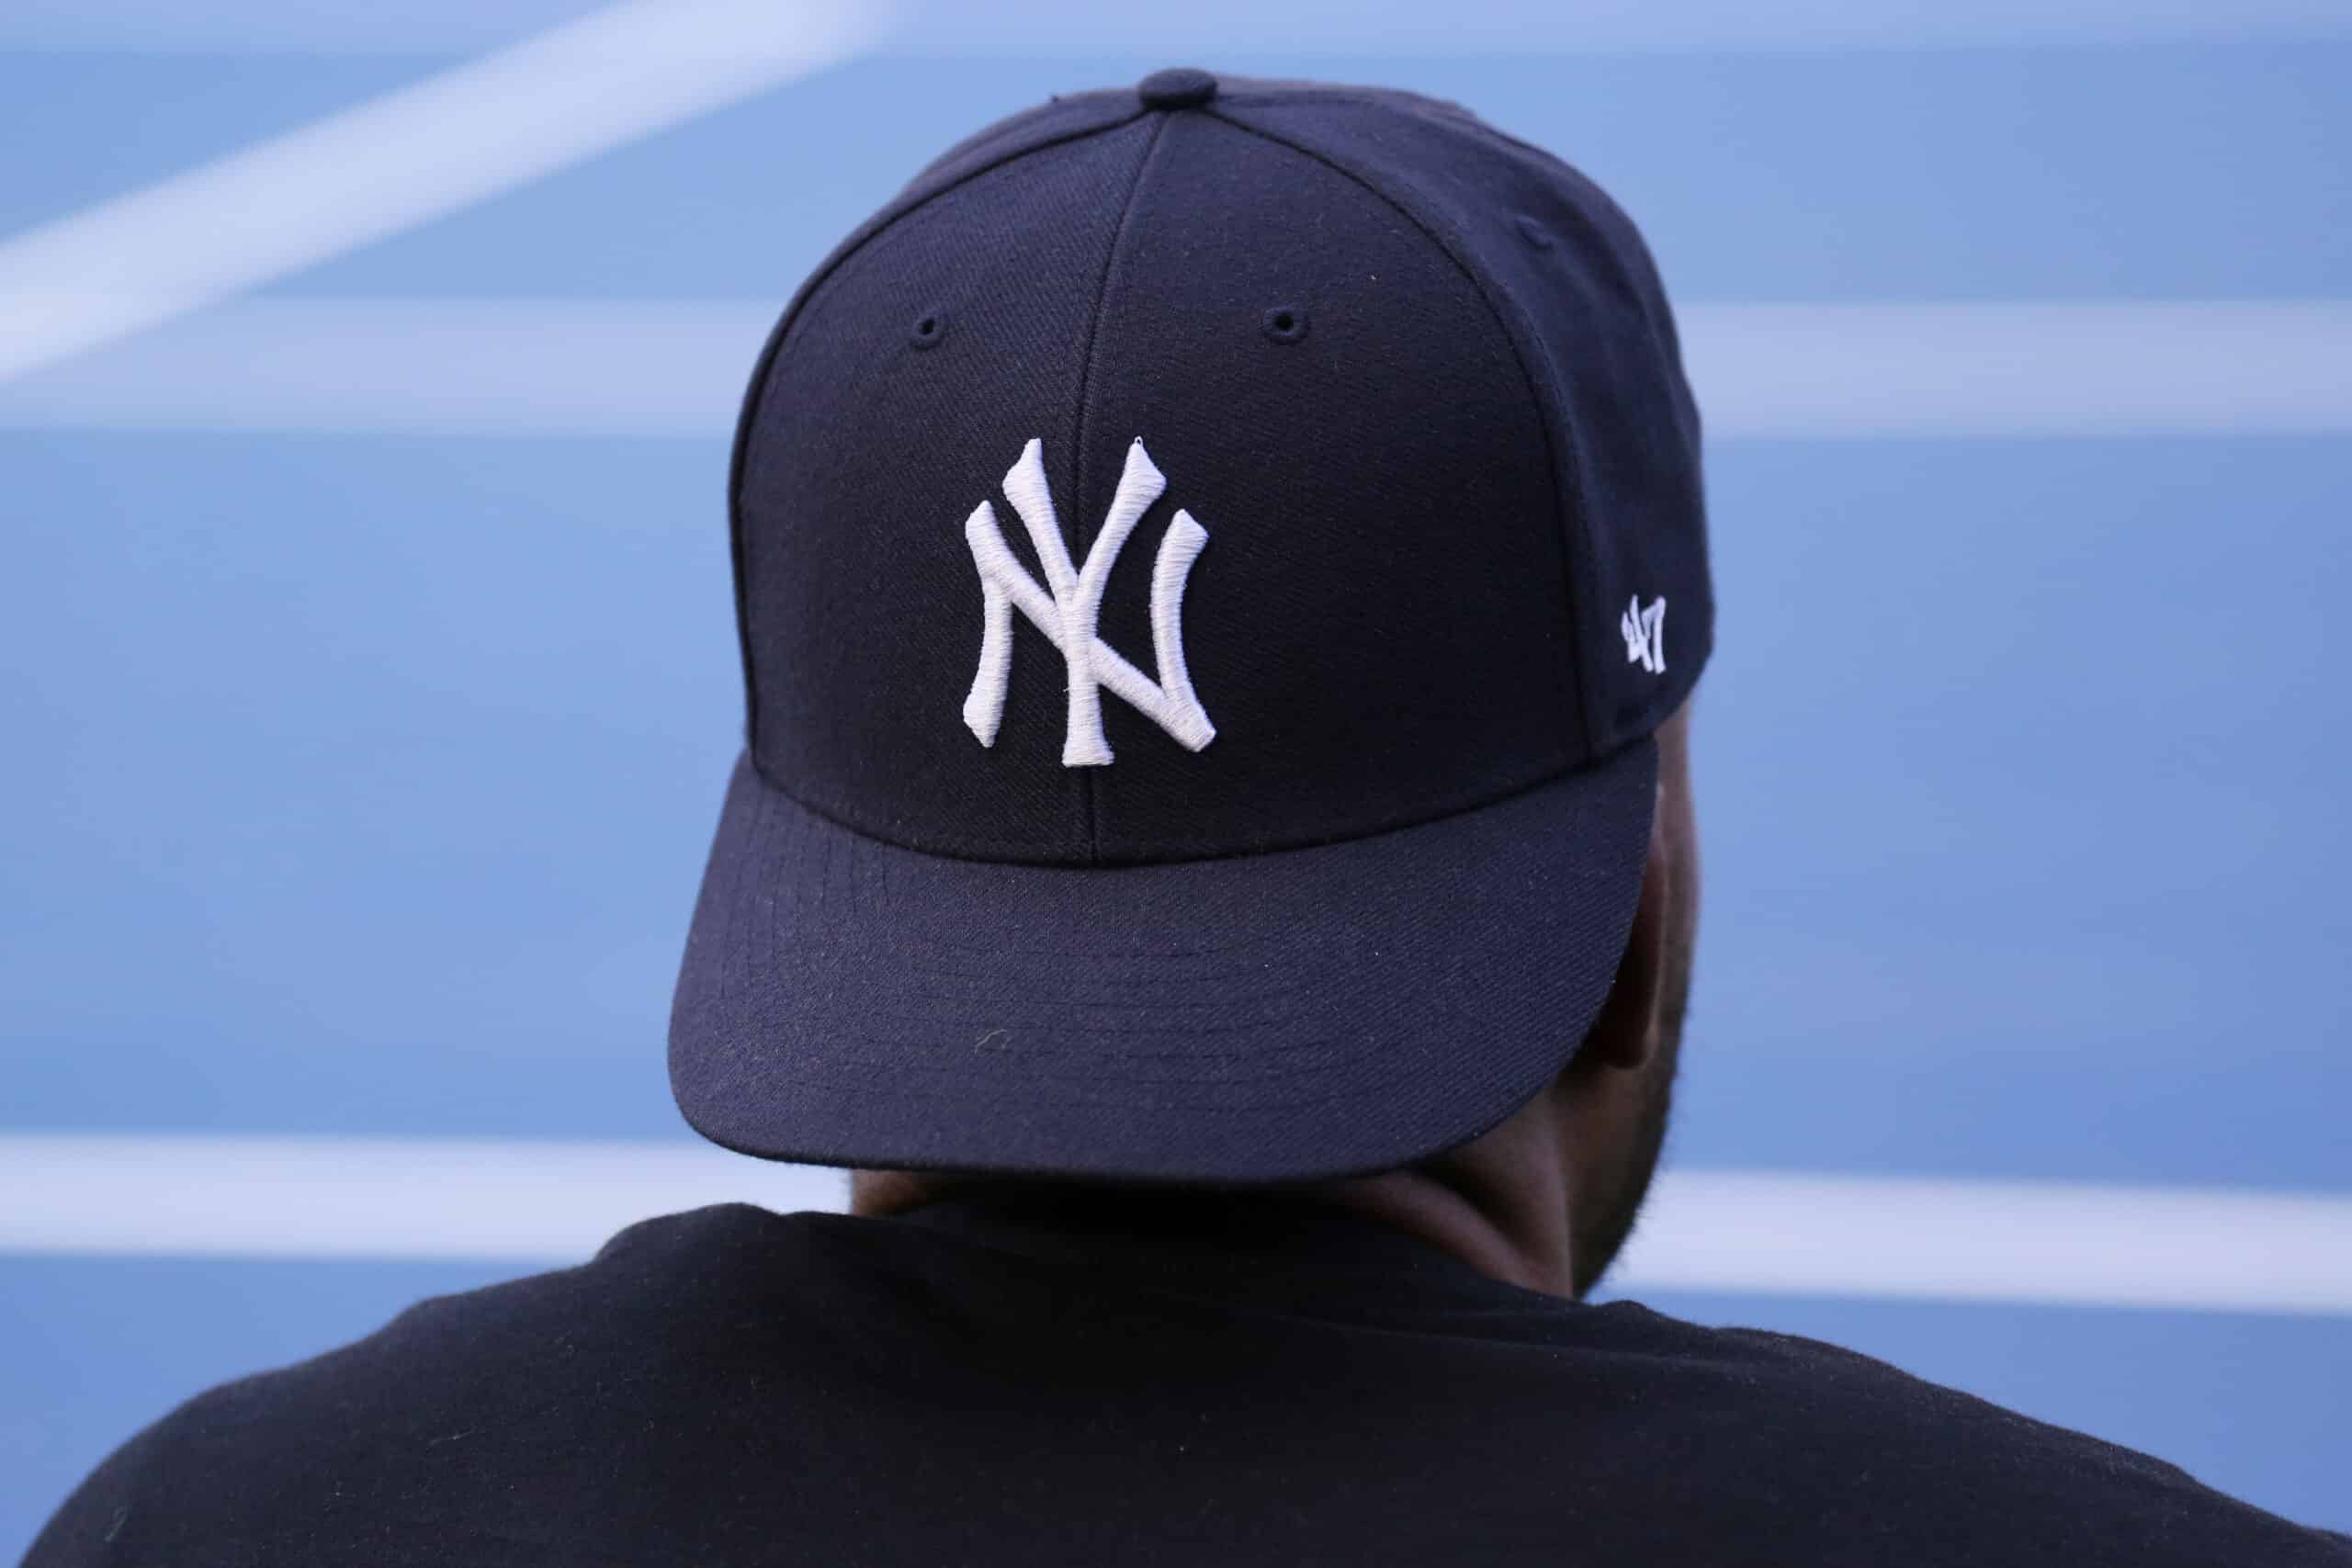 Yankees Fans Aren't Happy With AmazonPrime Games Streaming Stadium